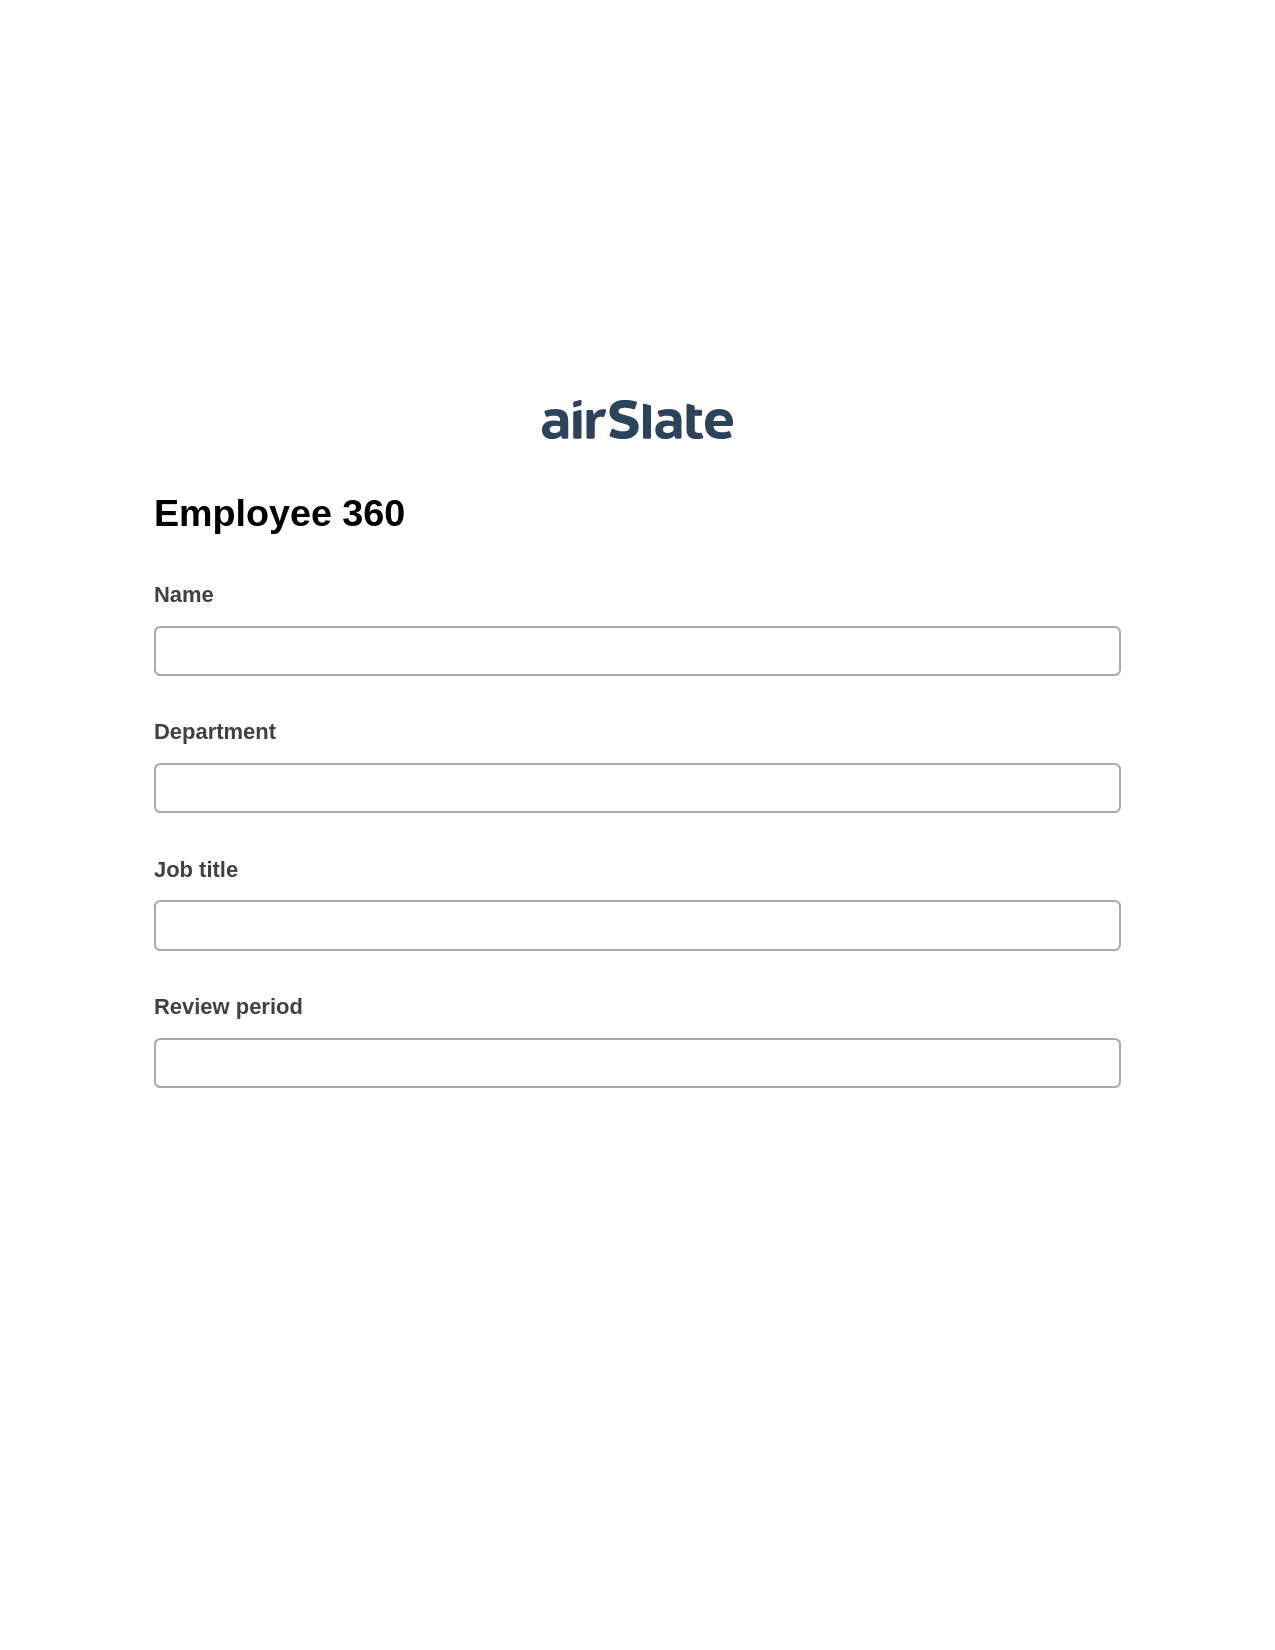 Employee 360 Pre-fill from CSV File Bot, Send a Slate with Roles Bot, Export to WebMerge Bot